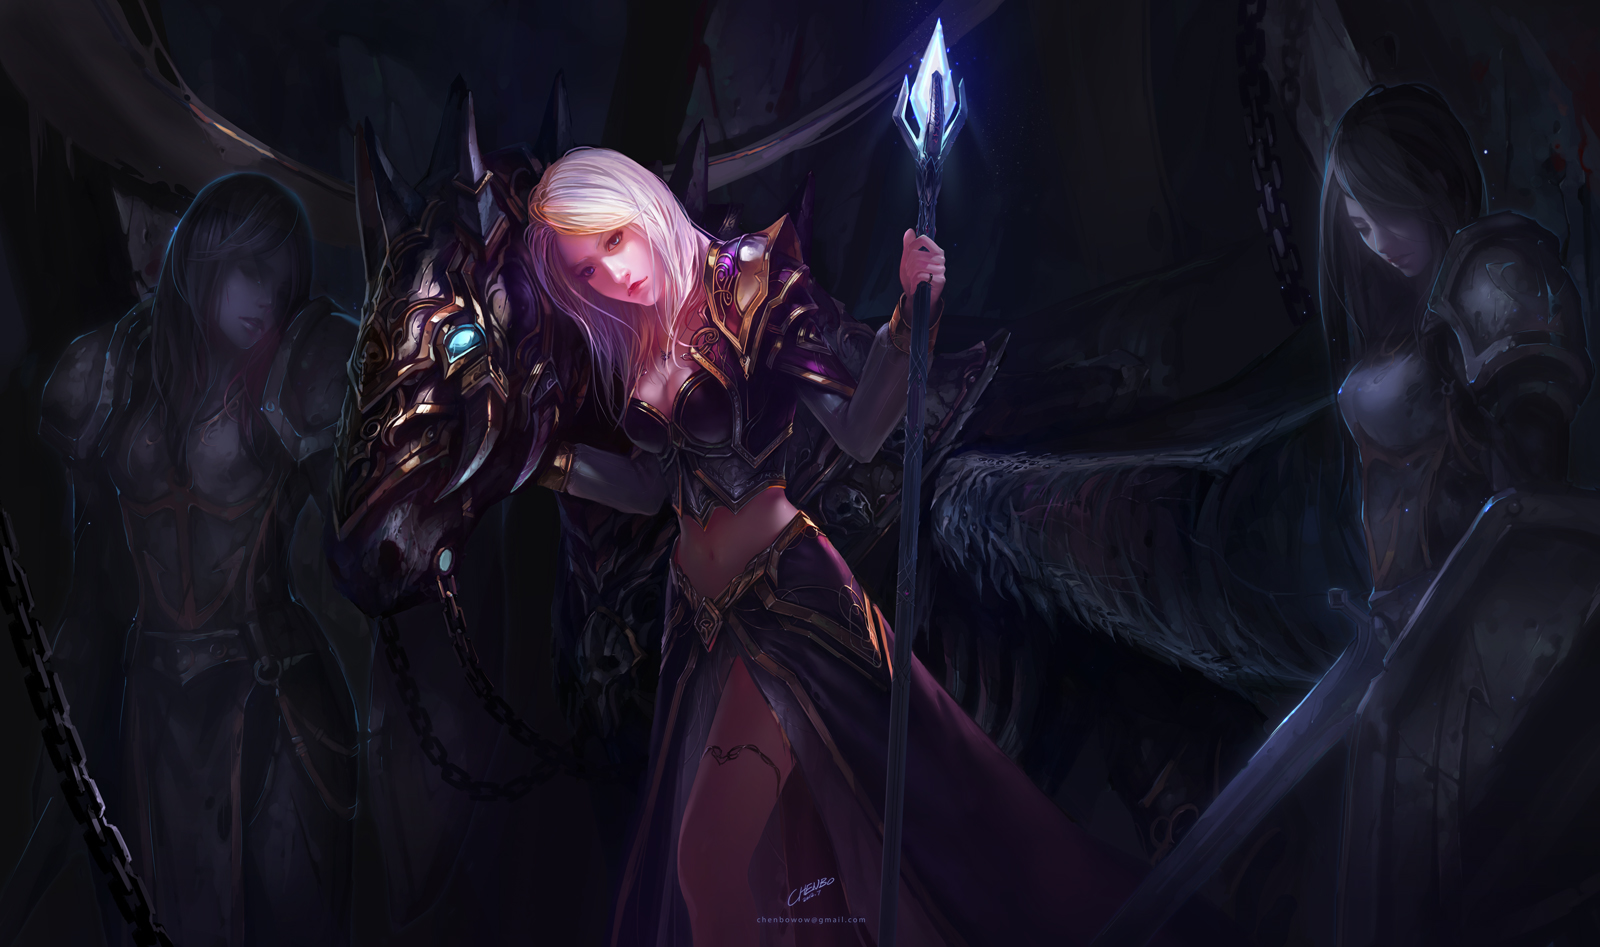 General 1600x947 Chenbo fantasy art fantasy girl armor Warcraft World of Warcraft Jaina Proudmoore weapon long hair blonde cleavage chains horse dress jewelry belly button necklace Pegasus shield sword staff white hair